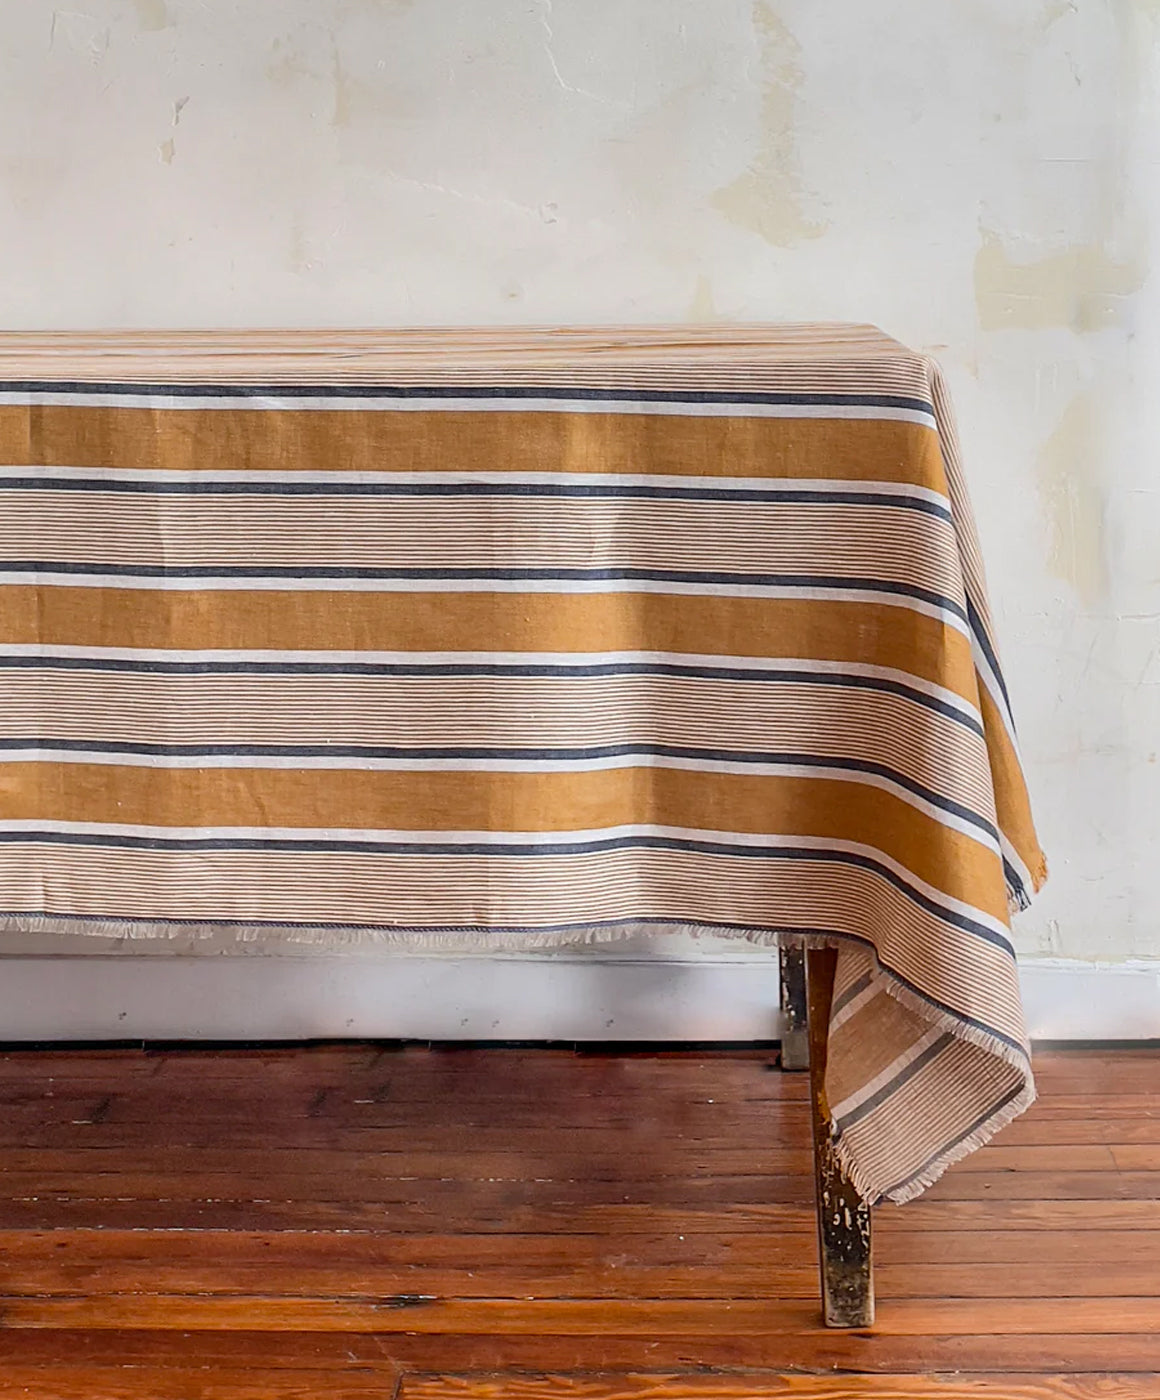   Striped Linen Tablecloth  